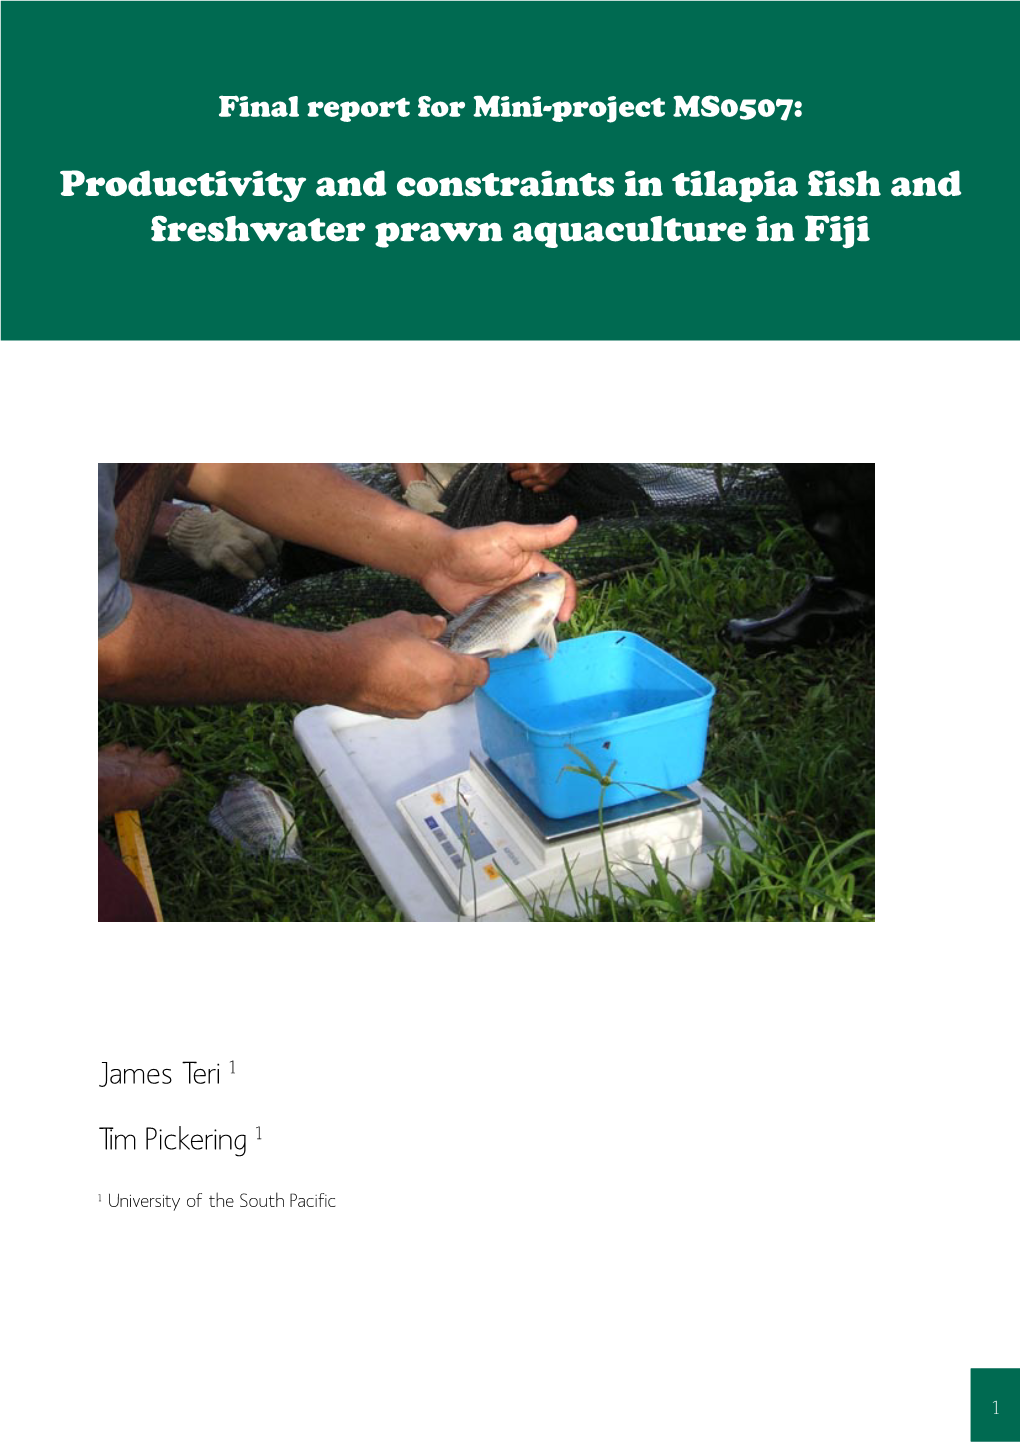 Productivity and Constraints in Tilapia Fish and Freshwater Prawn Aquaculture in Fiji